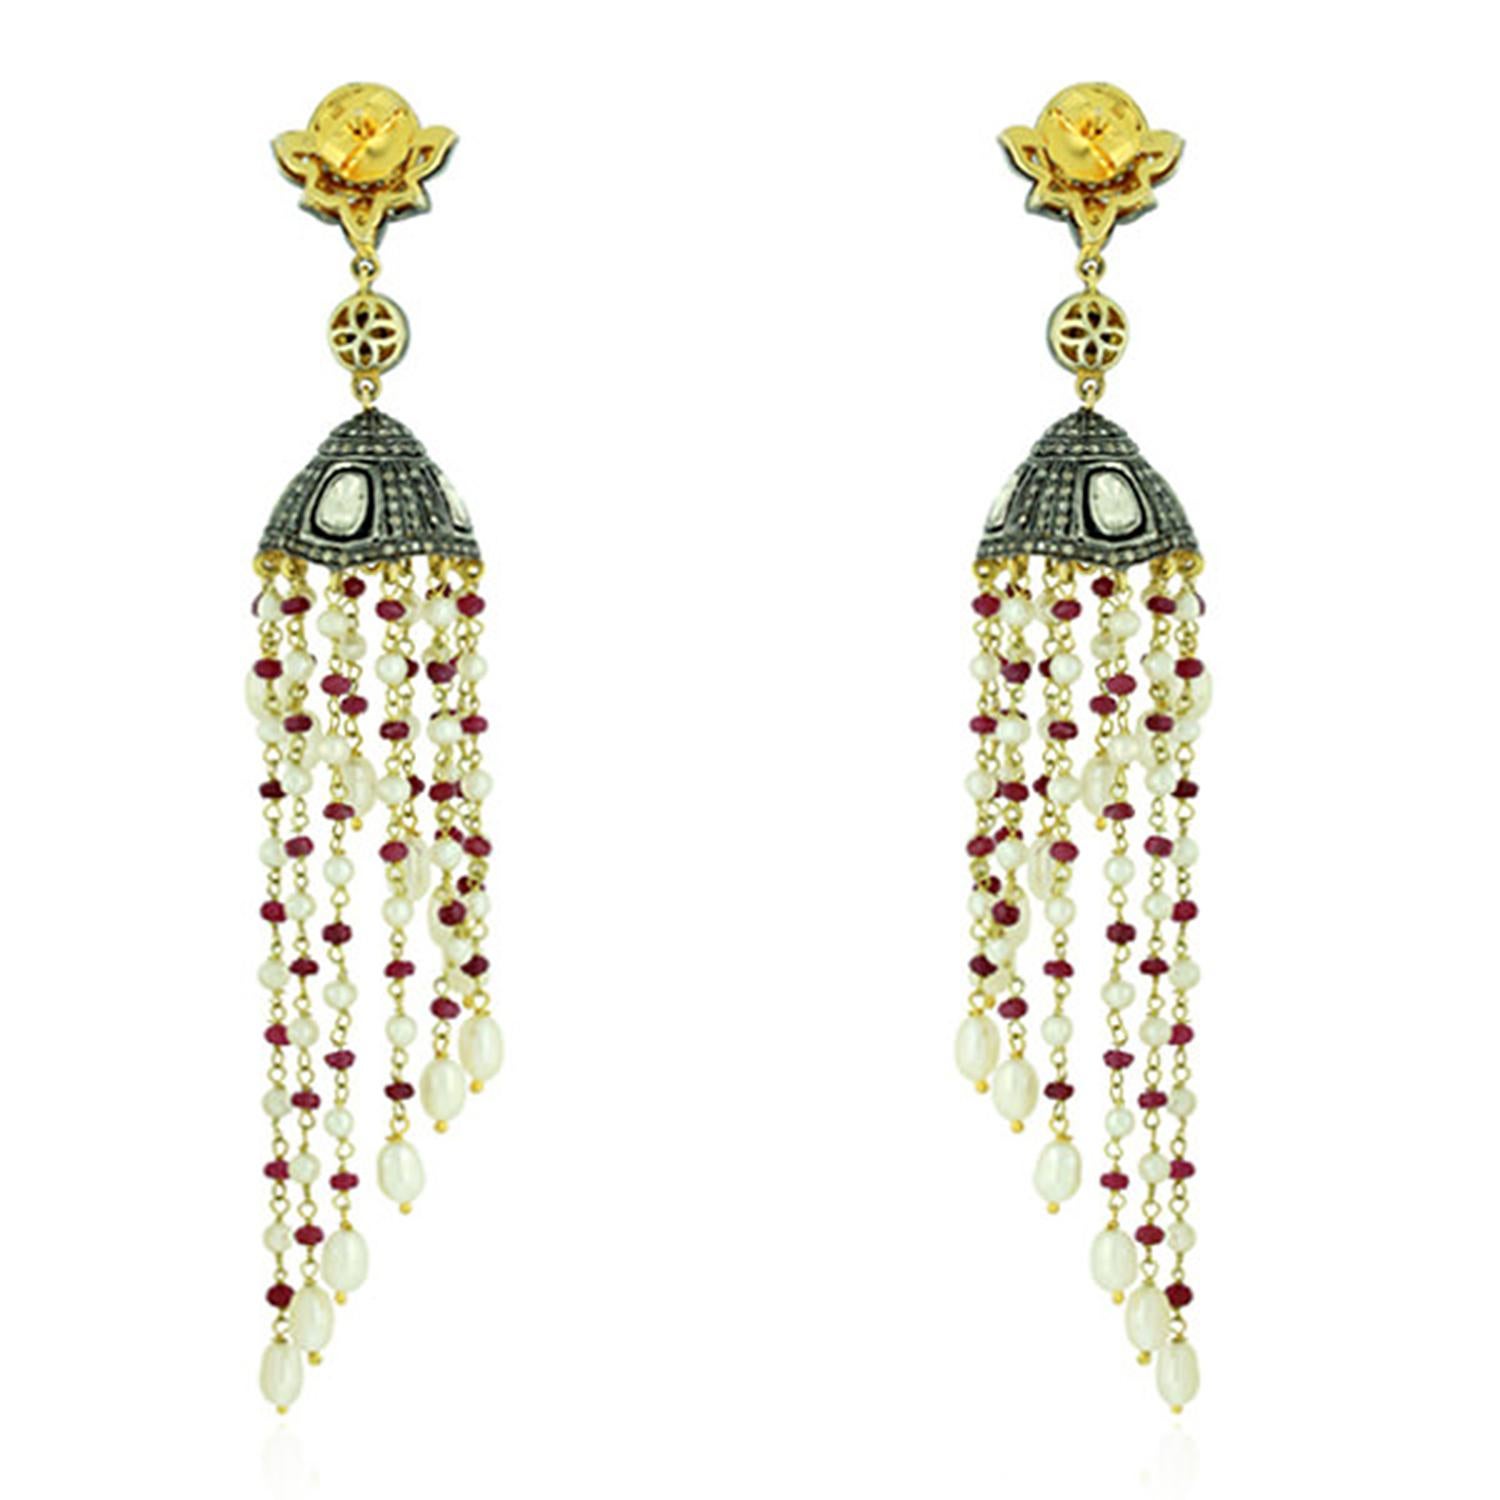 These stunning tassel earrings are handmade in 18-karat gold & sterling silver. It is set in 37.22 carats pearl, 12.7 carats ruby and 3.22 carats of diamonds in blackened finish. 

FOLLOW  MEGHNA JEWELS storefront to view the latest collection &